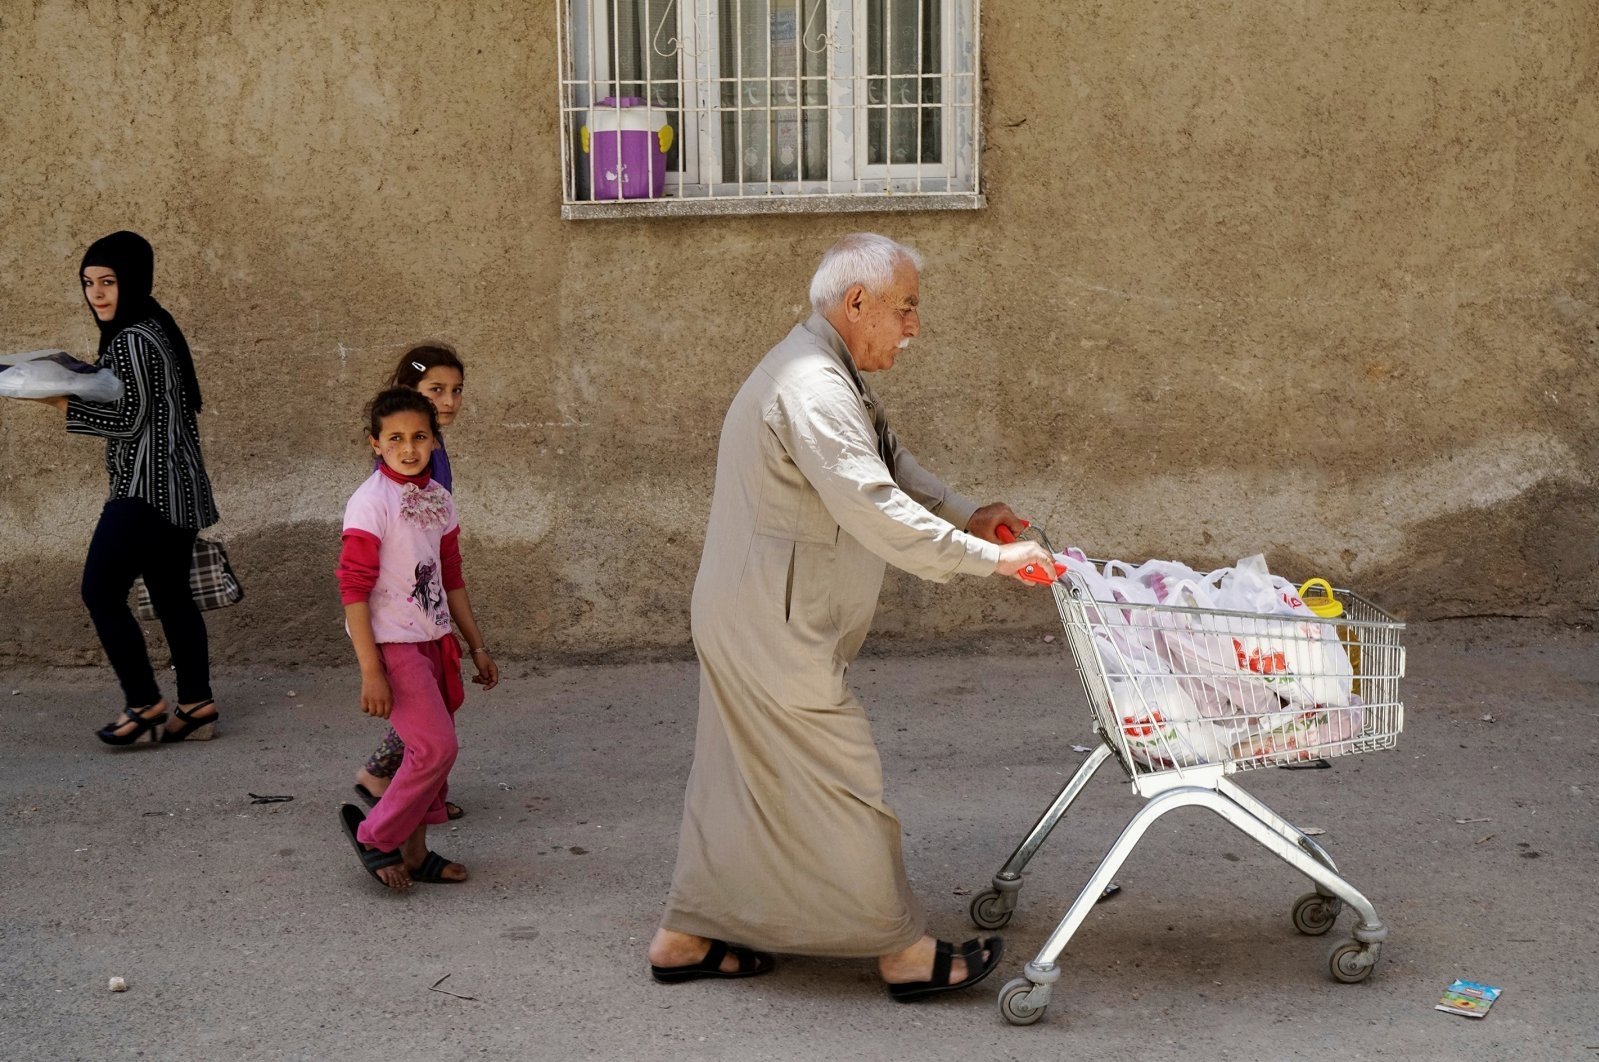 Ahmed, a 60-year old Syrian refugee man, pushes a shopping cart as he walks to his home in Gaziantep, Turkey, May 16, 2016. (Reuters Photo)